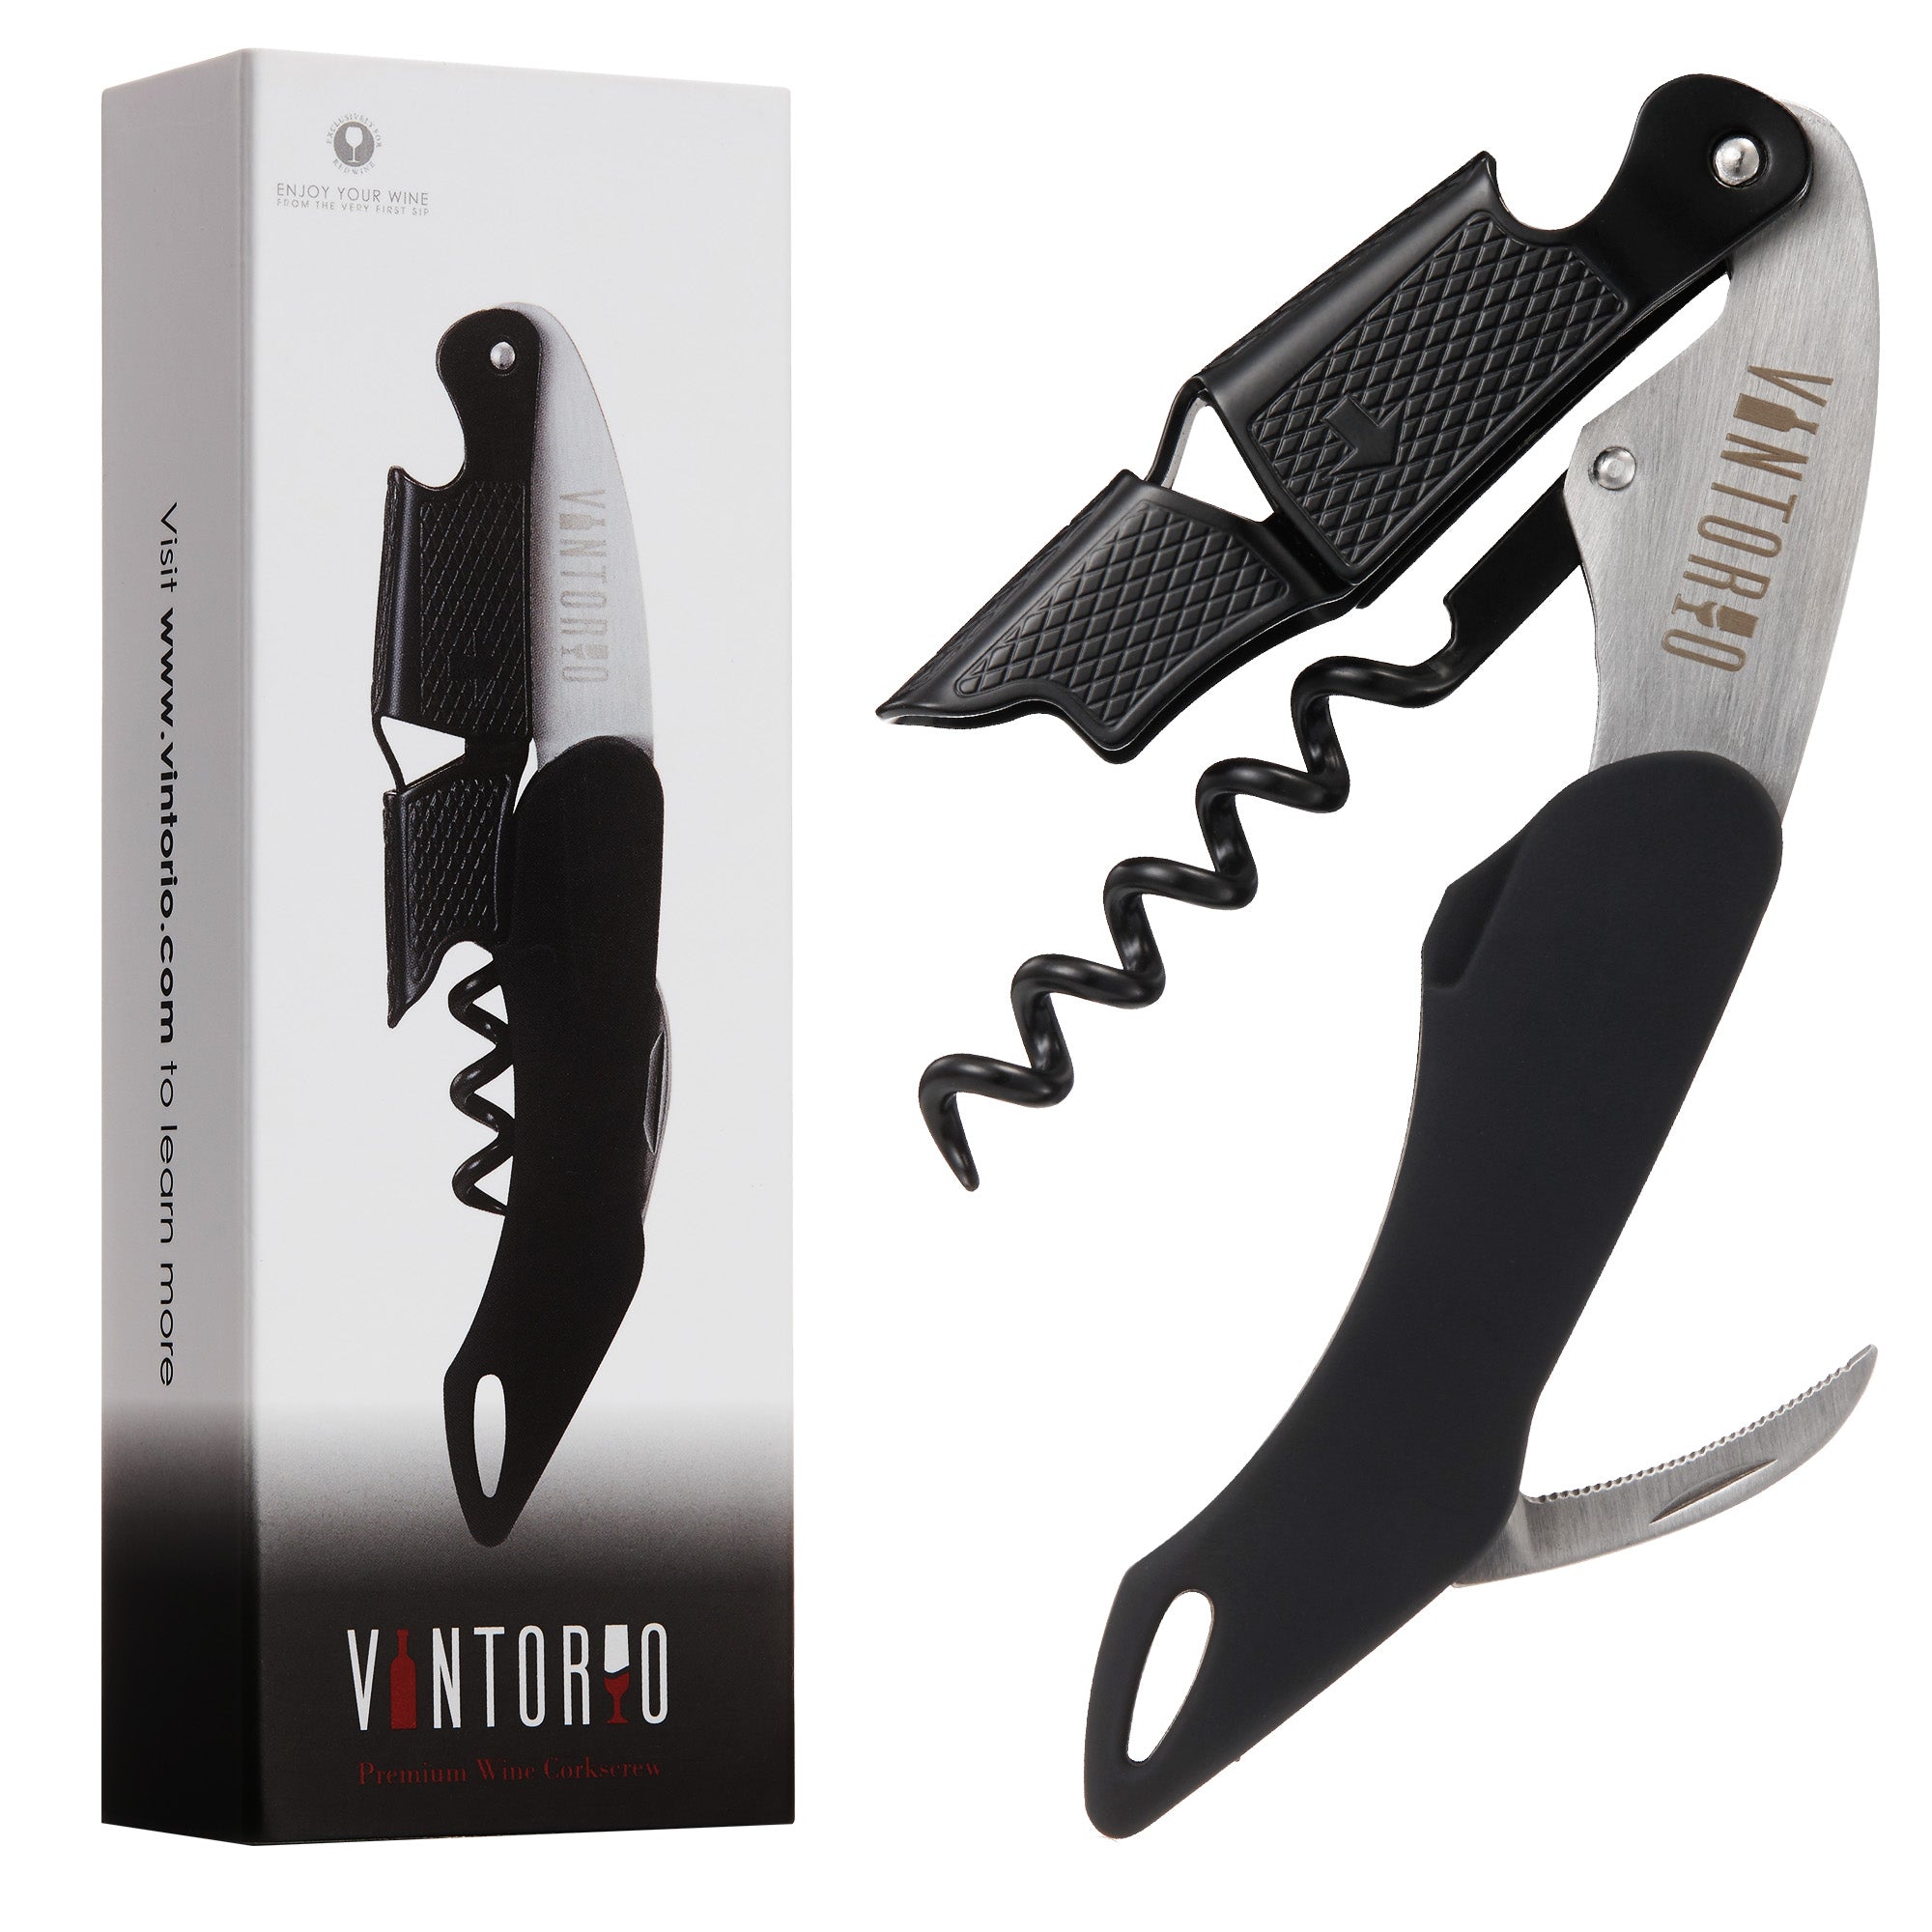 High Quality Corkscrew Beer Bottle Opener Easy To Carry Wine